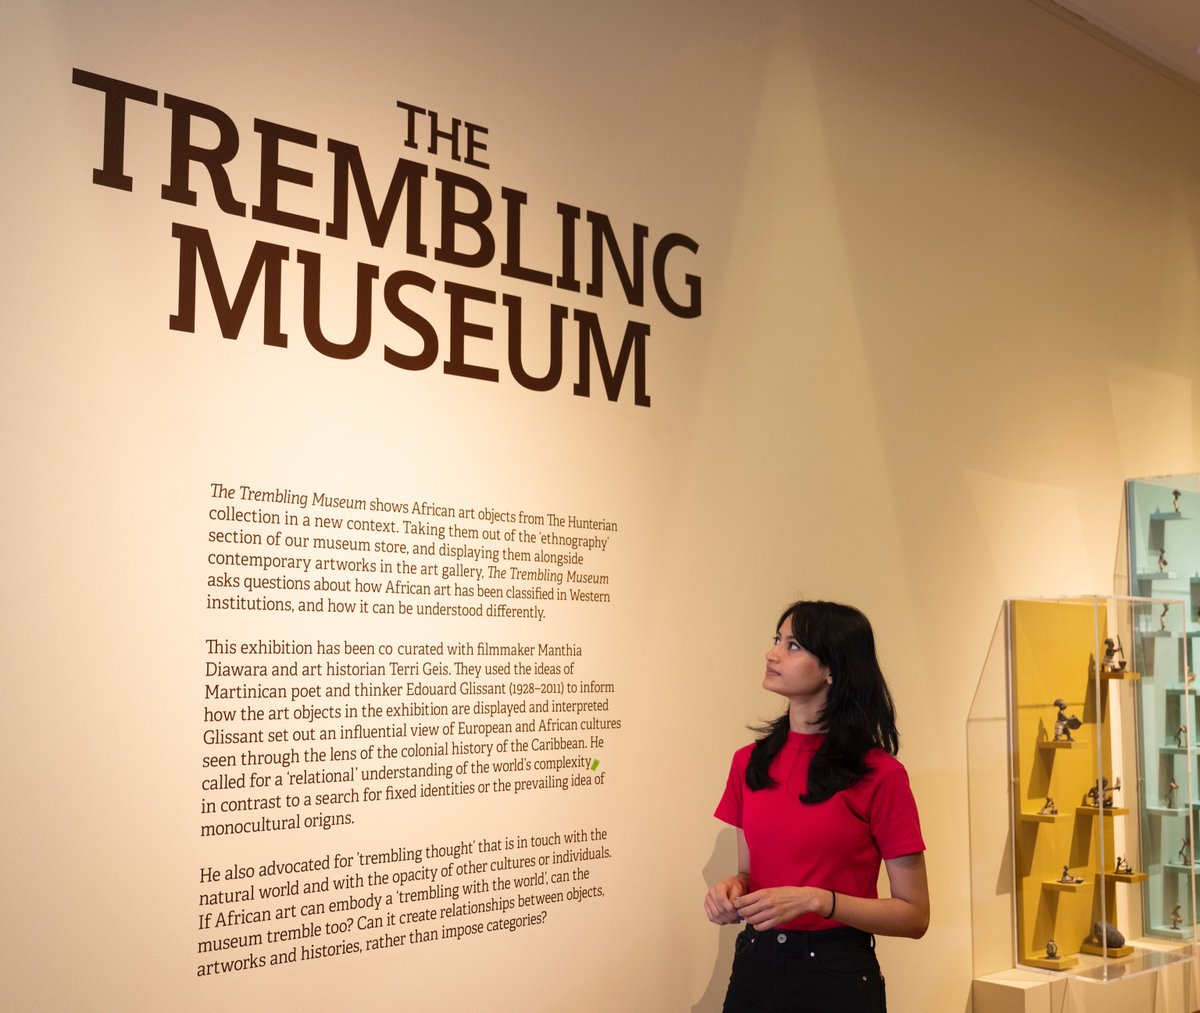 Don’t miss your last chance to see ‘The Trembling Museum’ at the Hunterian Art Gallery. Check it out this weekend, closing end of day Sunday 19 May.